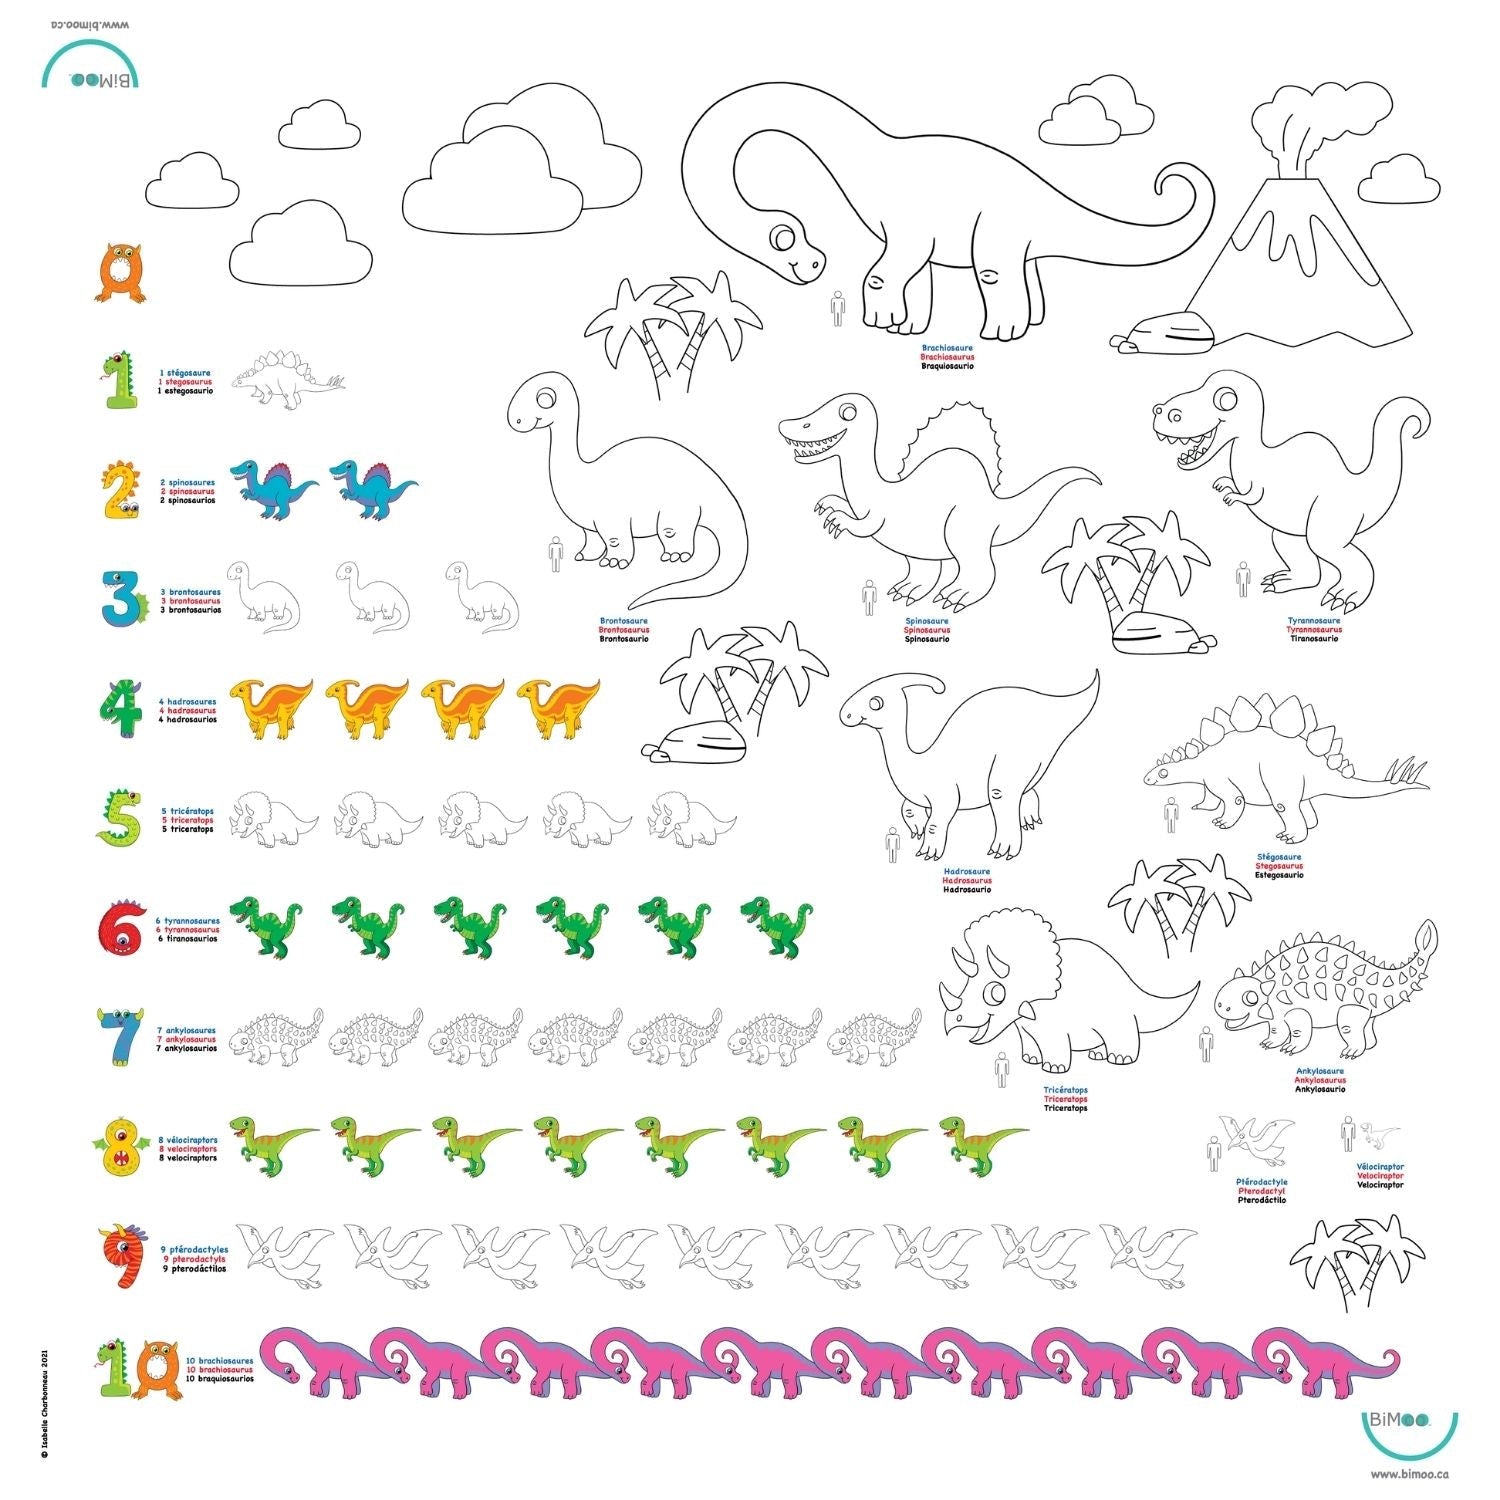 numbers with dinosaurs tablecloth design nombres avec dinosaures nappe a colorier bimoo 45x45in